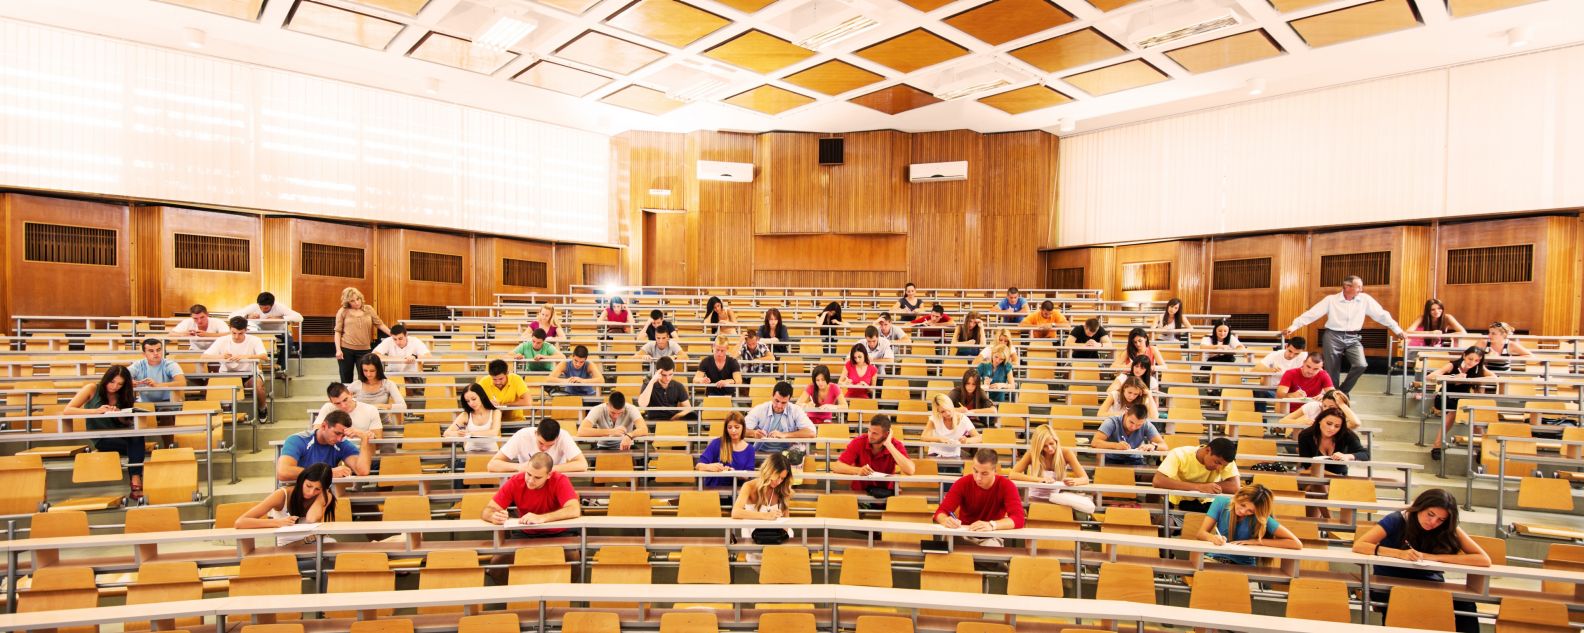 Large university classroom with students